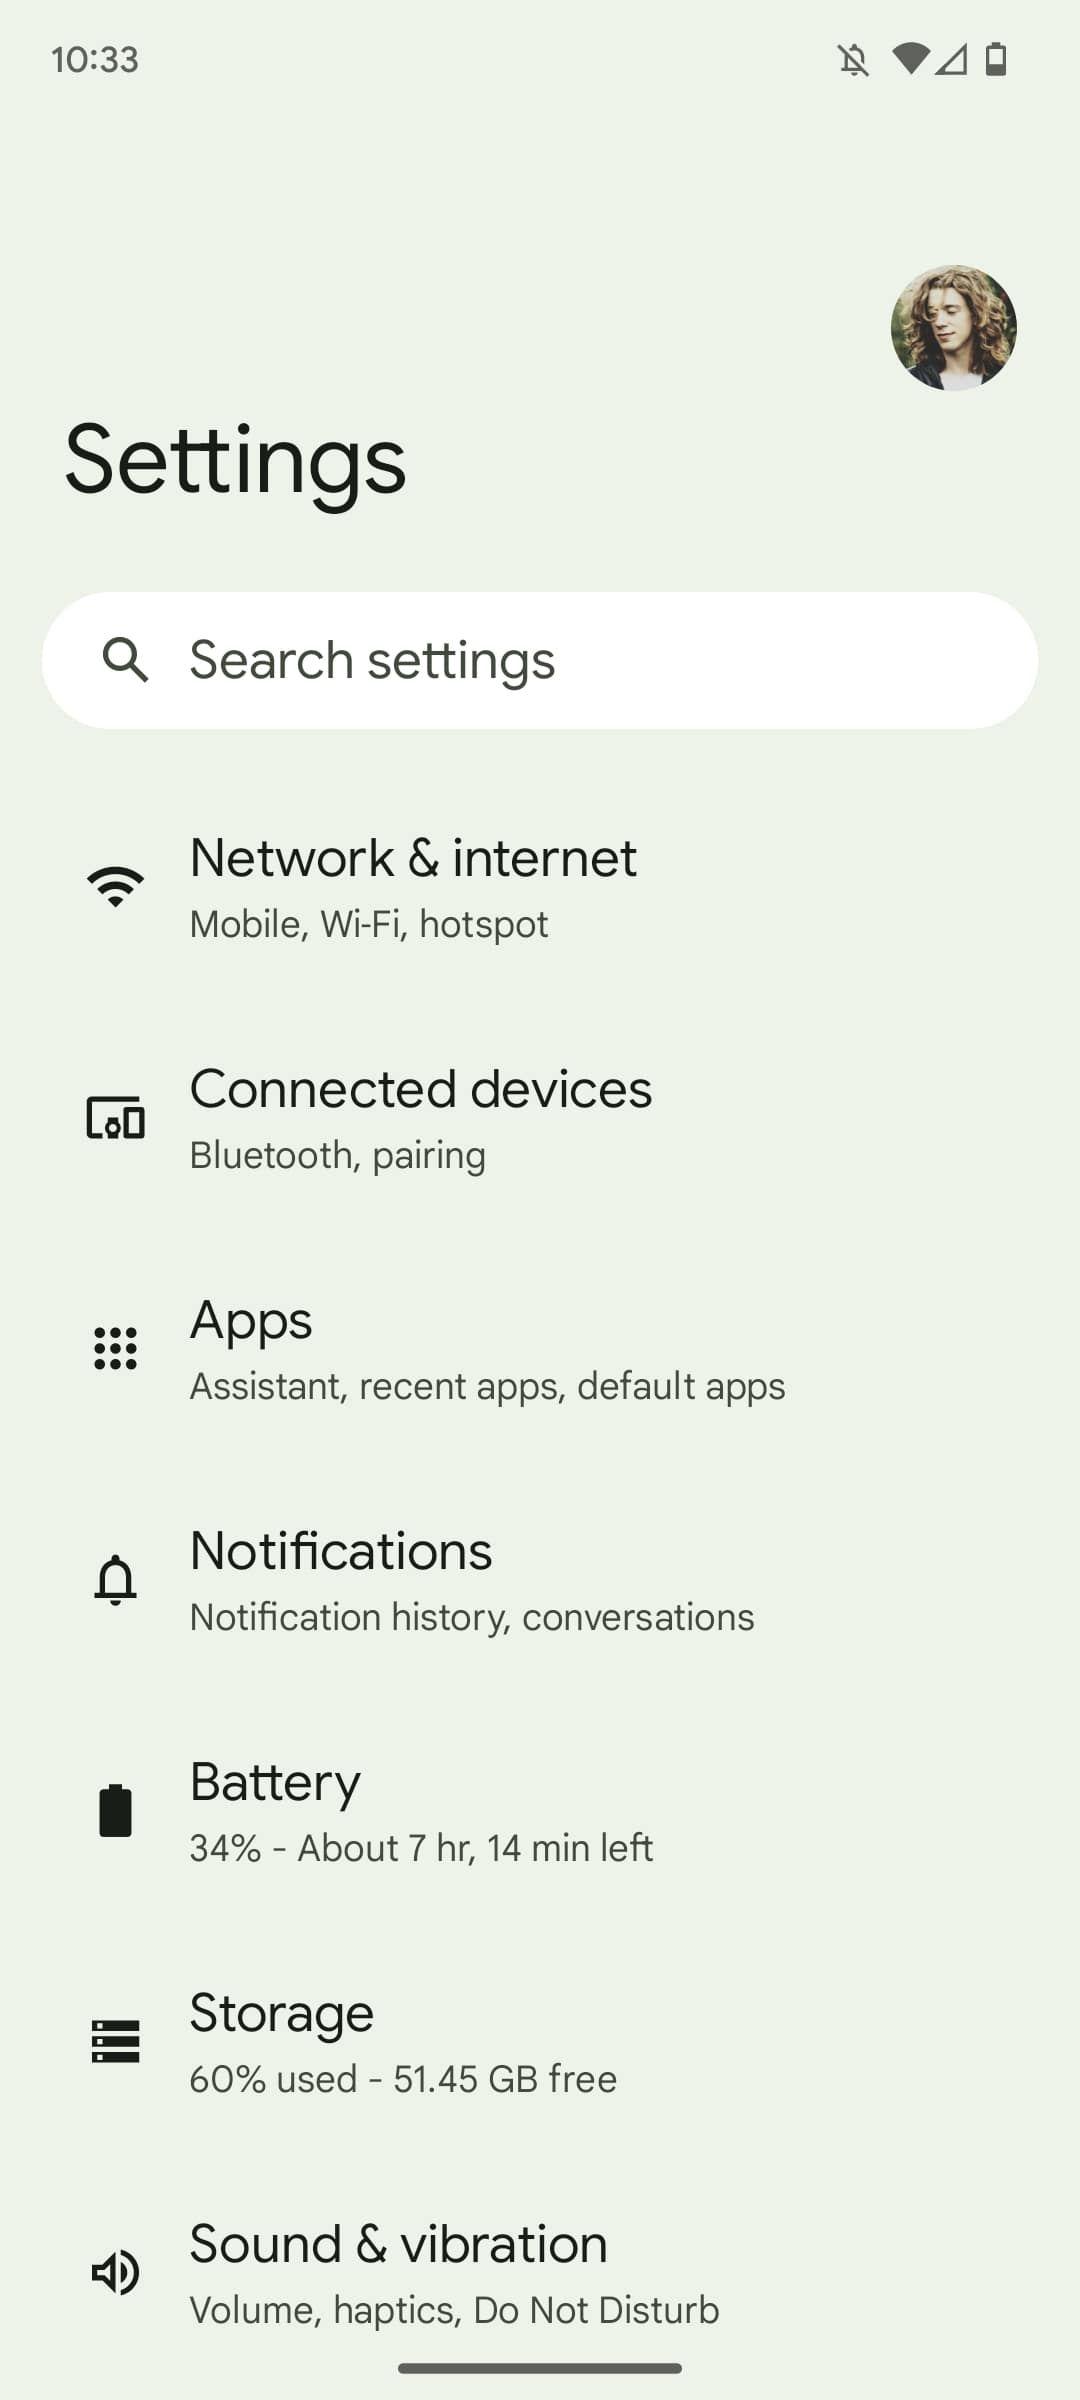 Access settings on Android